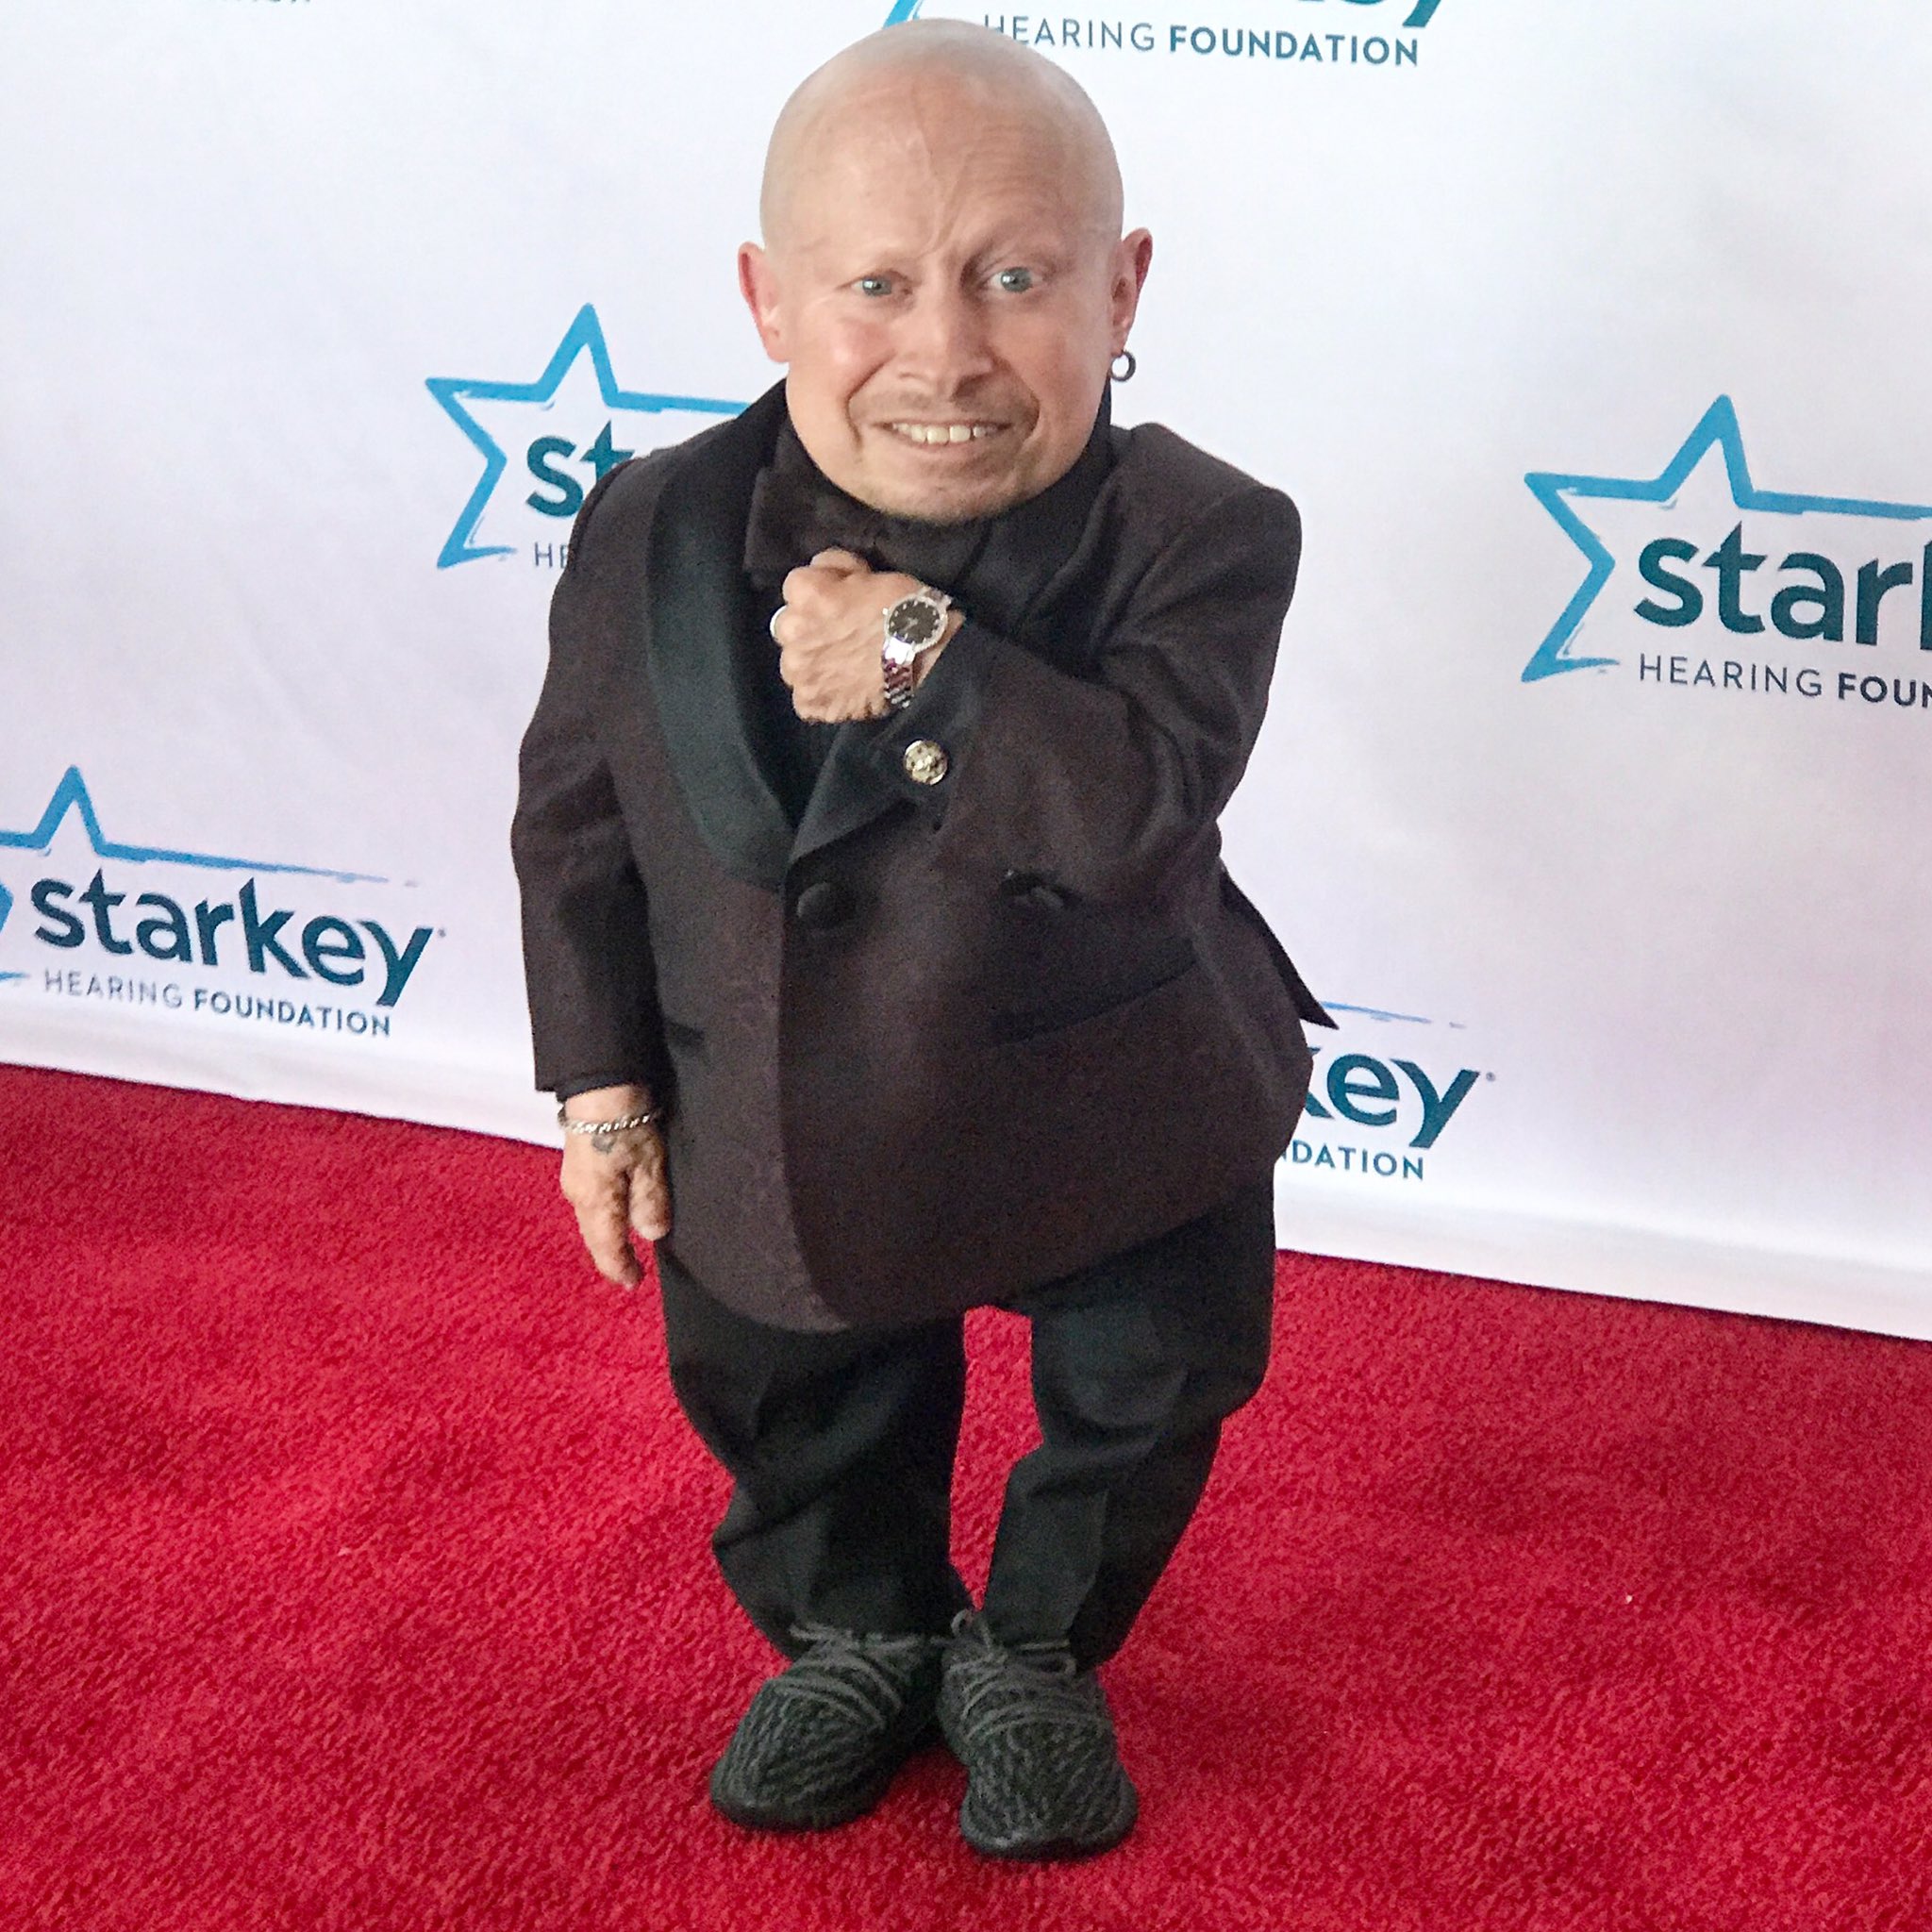 Verne Troyer on Twitter.